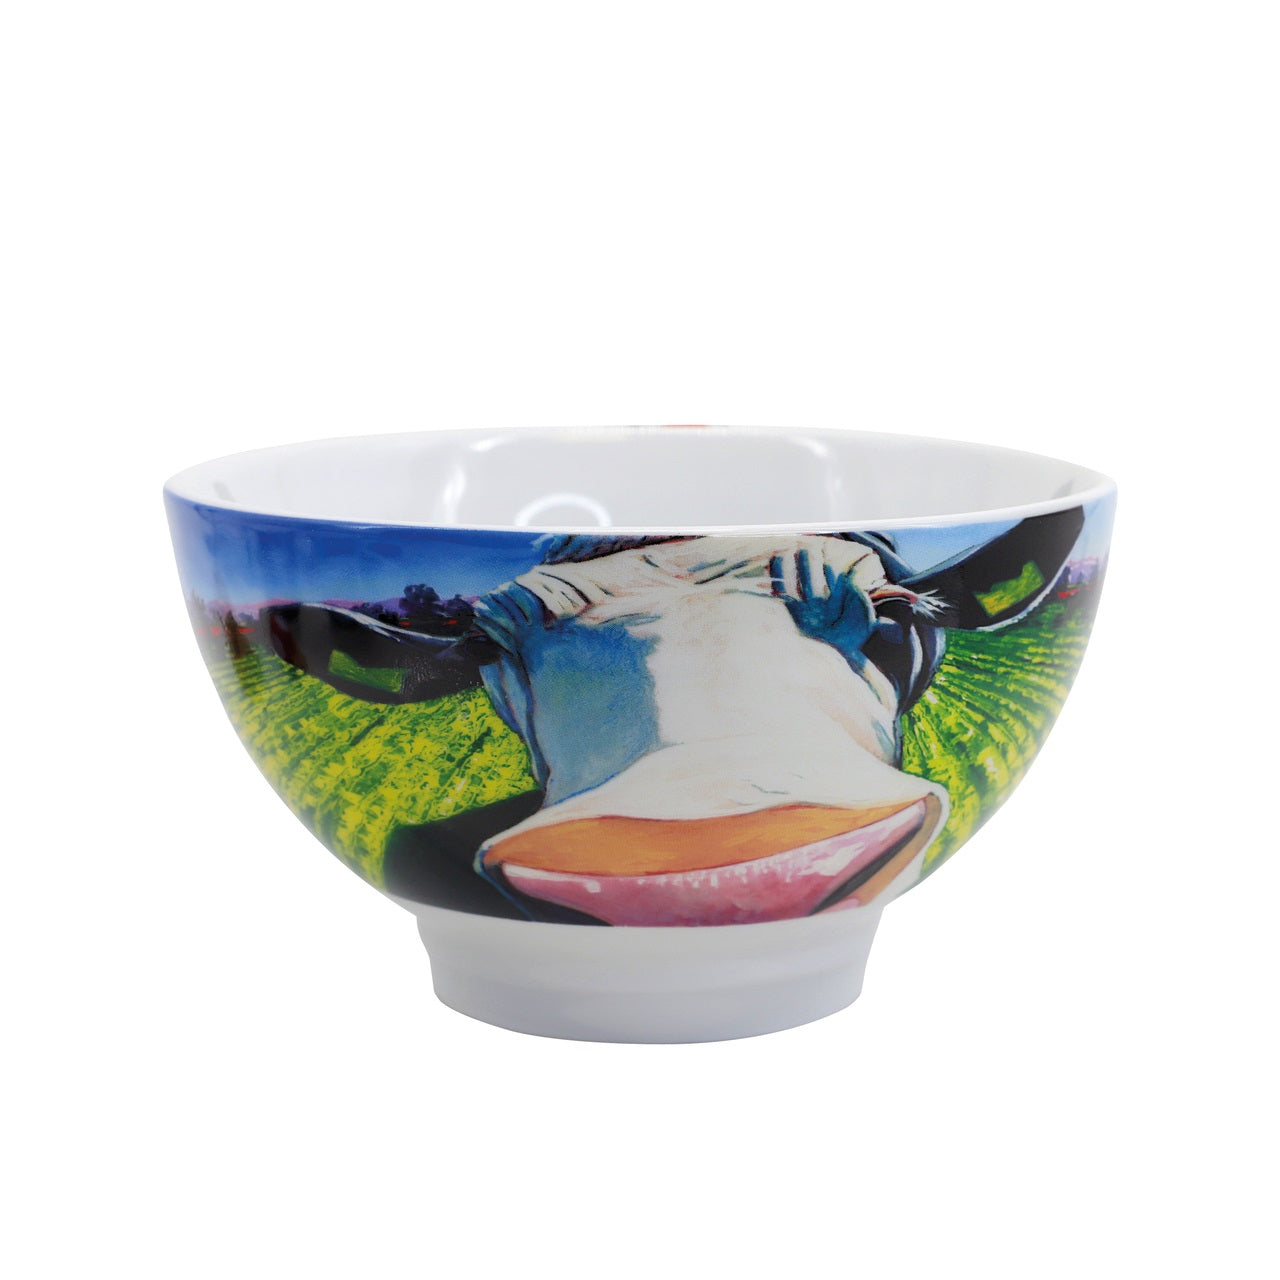 Eoin O'Connor Set of 4 Bowls - NEW 2021  Tipperary Crystal in association with Irish Artist Eoin O Connor are delighted to present you our new Cafe Range. These high quality designs come wonderfully presented in funky rigid gift boxes